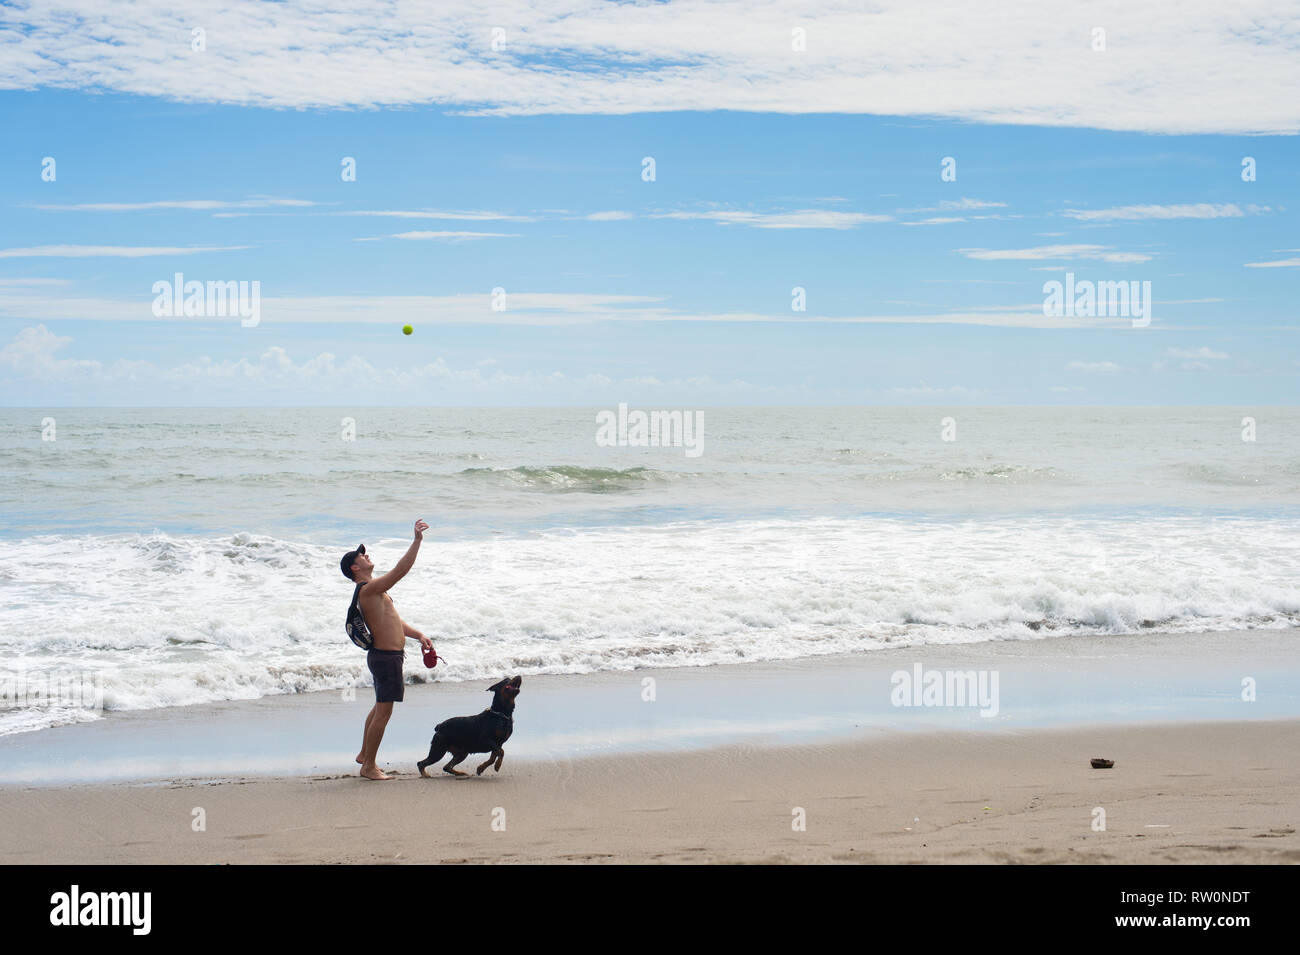 BALI, INDONESIA - JANUARY 16, 2017: Man playing ball with pet dog at the beach, cloudy wetaher Stock Photo